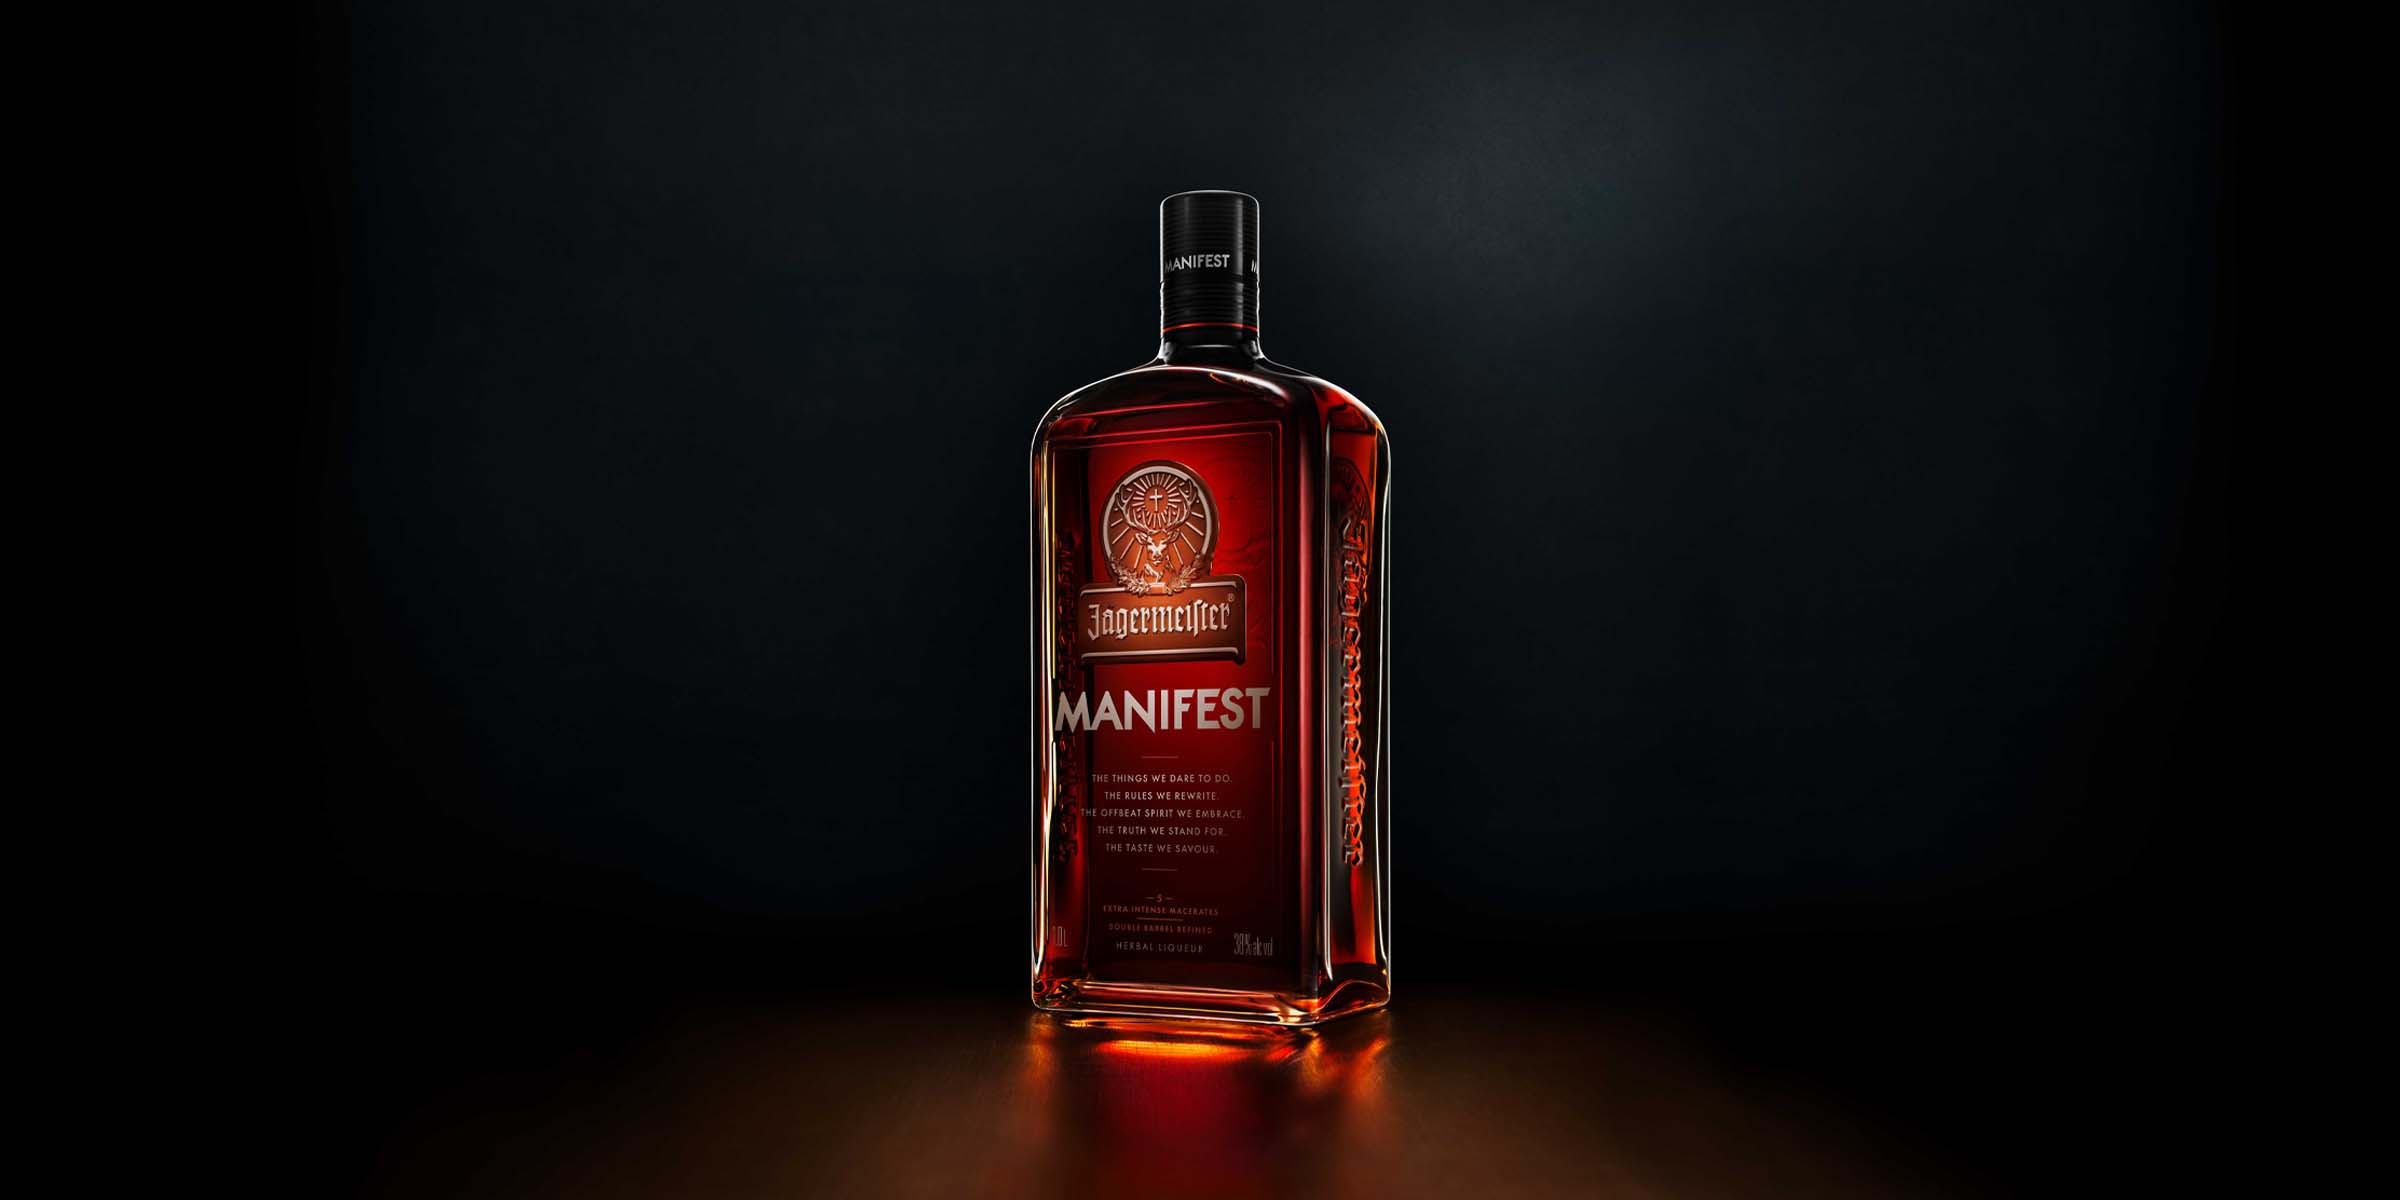 Jagermeister eyes broader consumer appeal with 'sophisticated